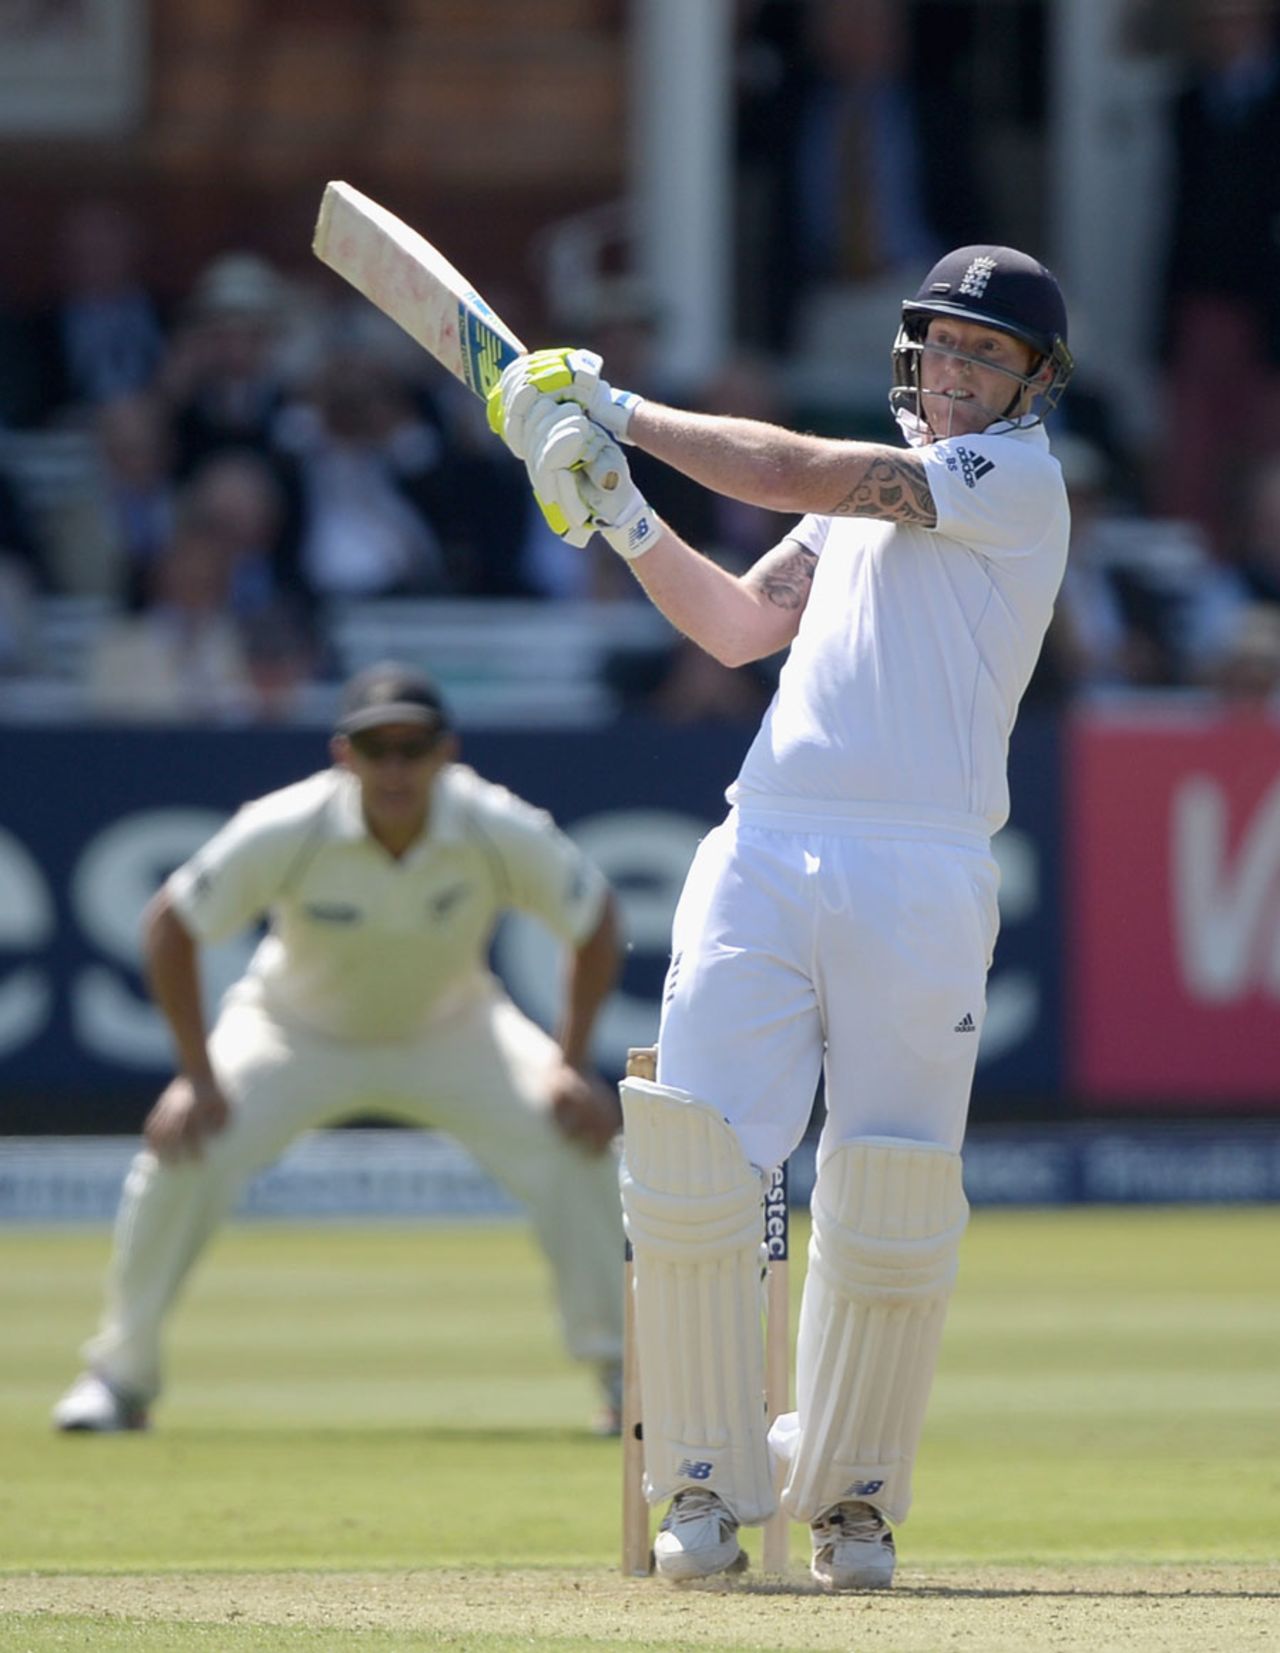 Ben Stokes struck some powerful boundaries in his 92, England v New Zealand, 1st Investec Test, Lord's, 1st day, May 21, 2015